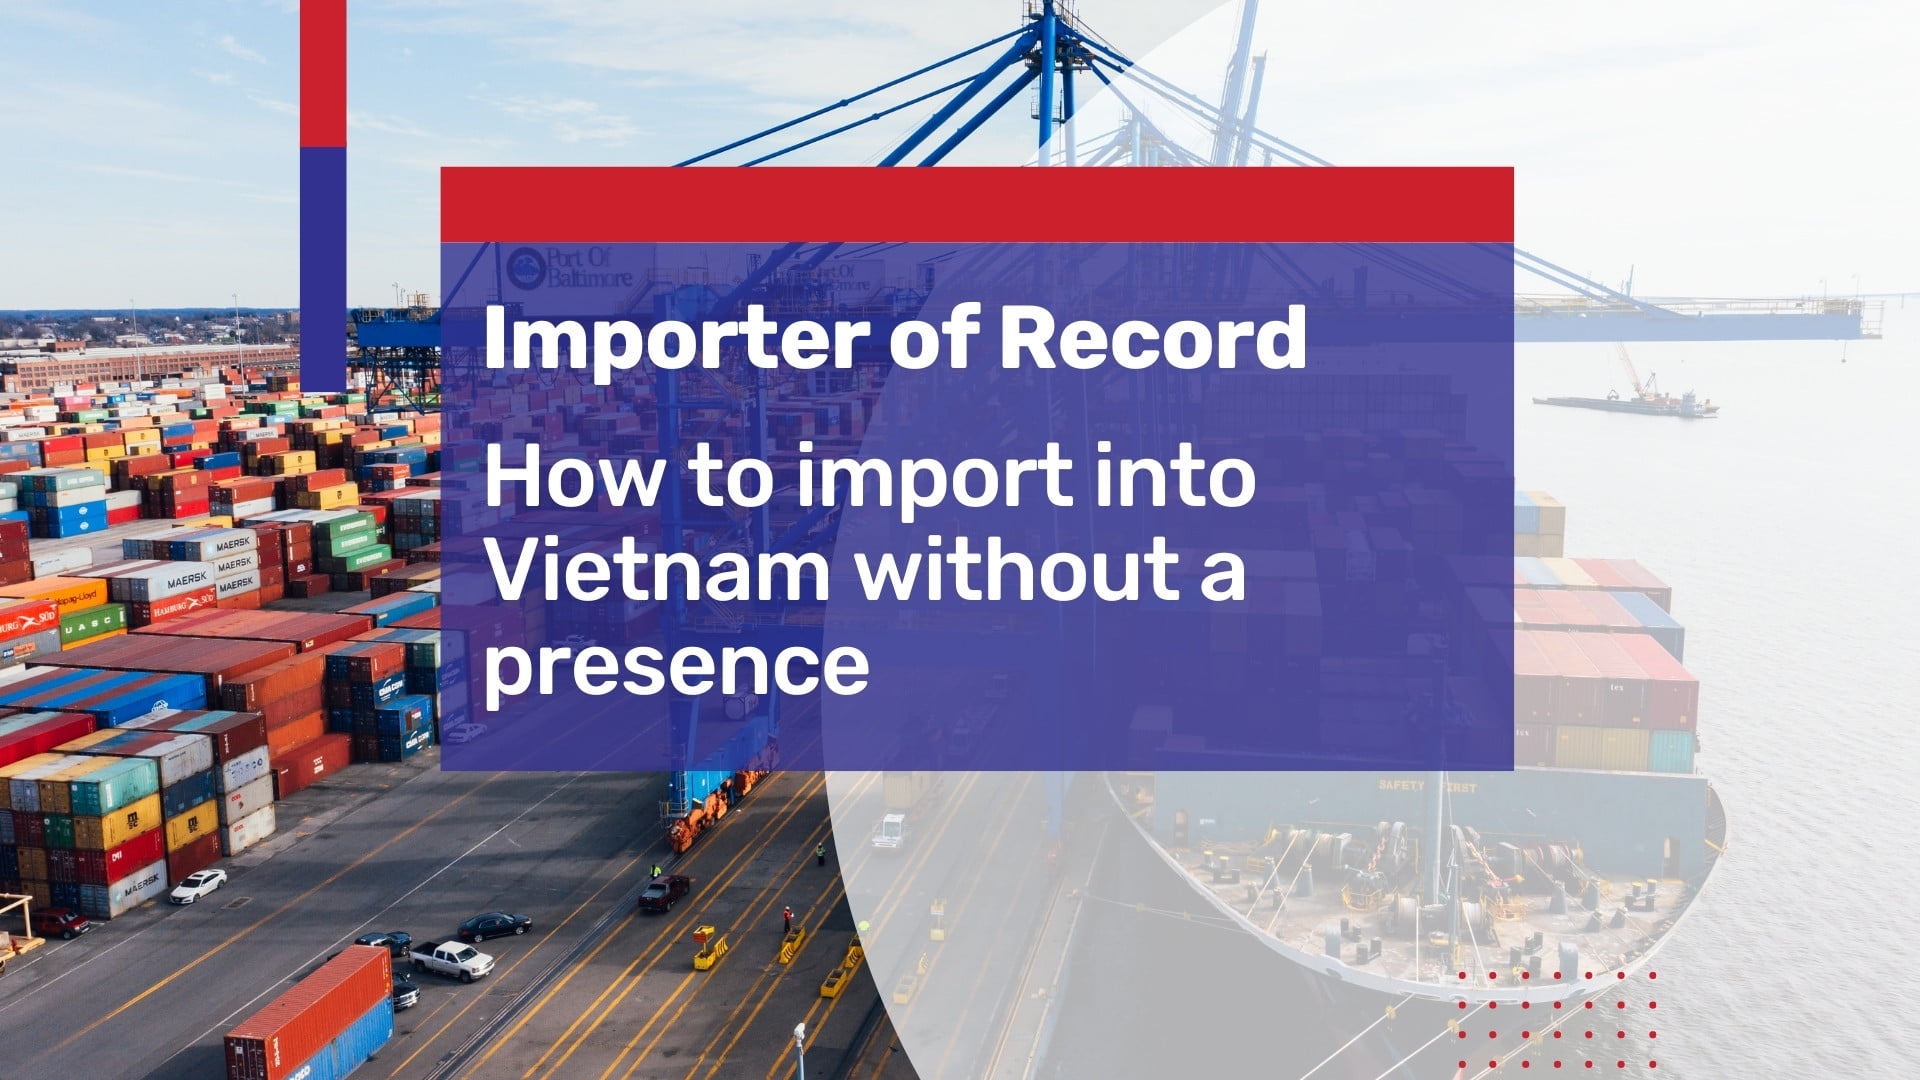 How to import into Vietnam without a presence: Importer of Record